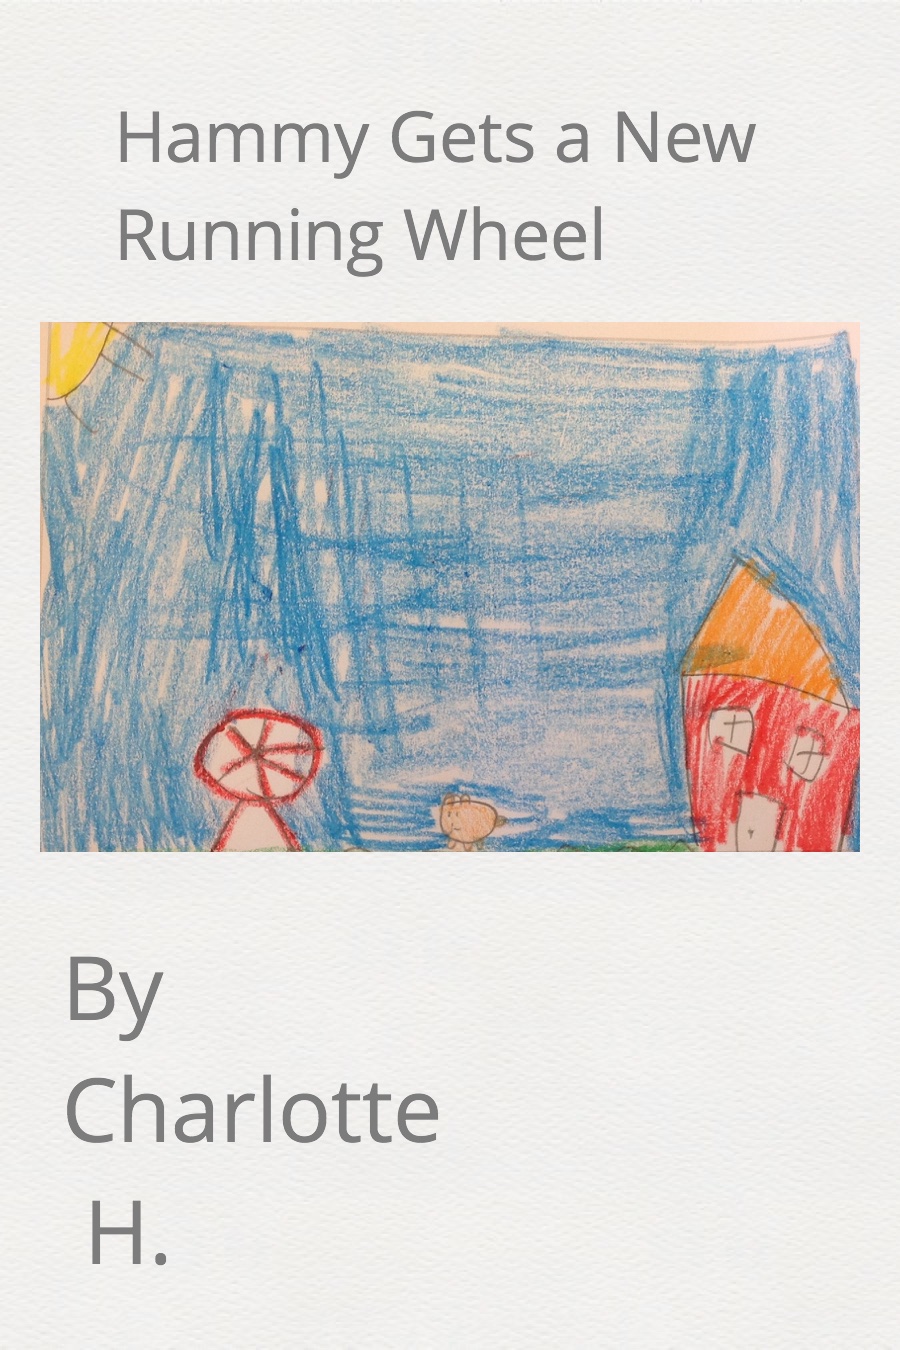 Hammy gets a new running wheel by Charlotte H